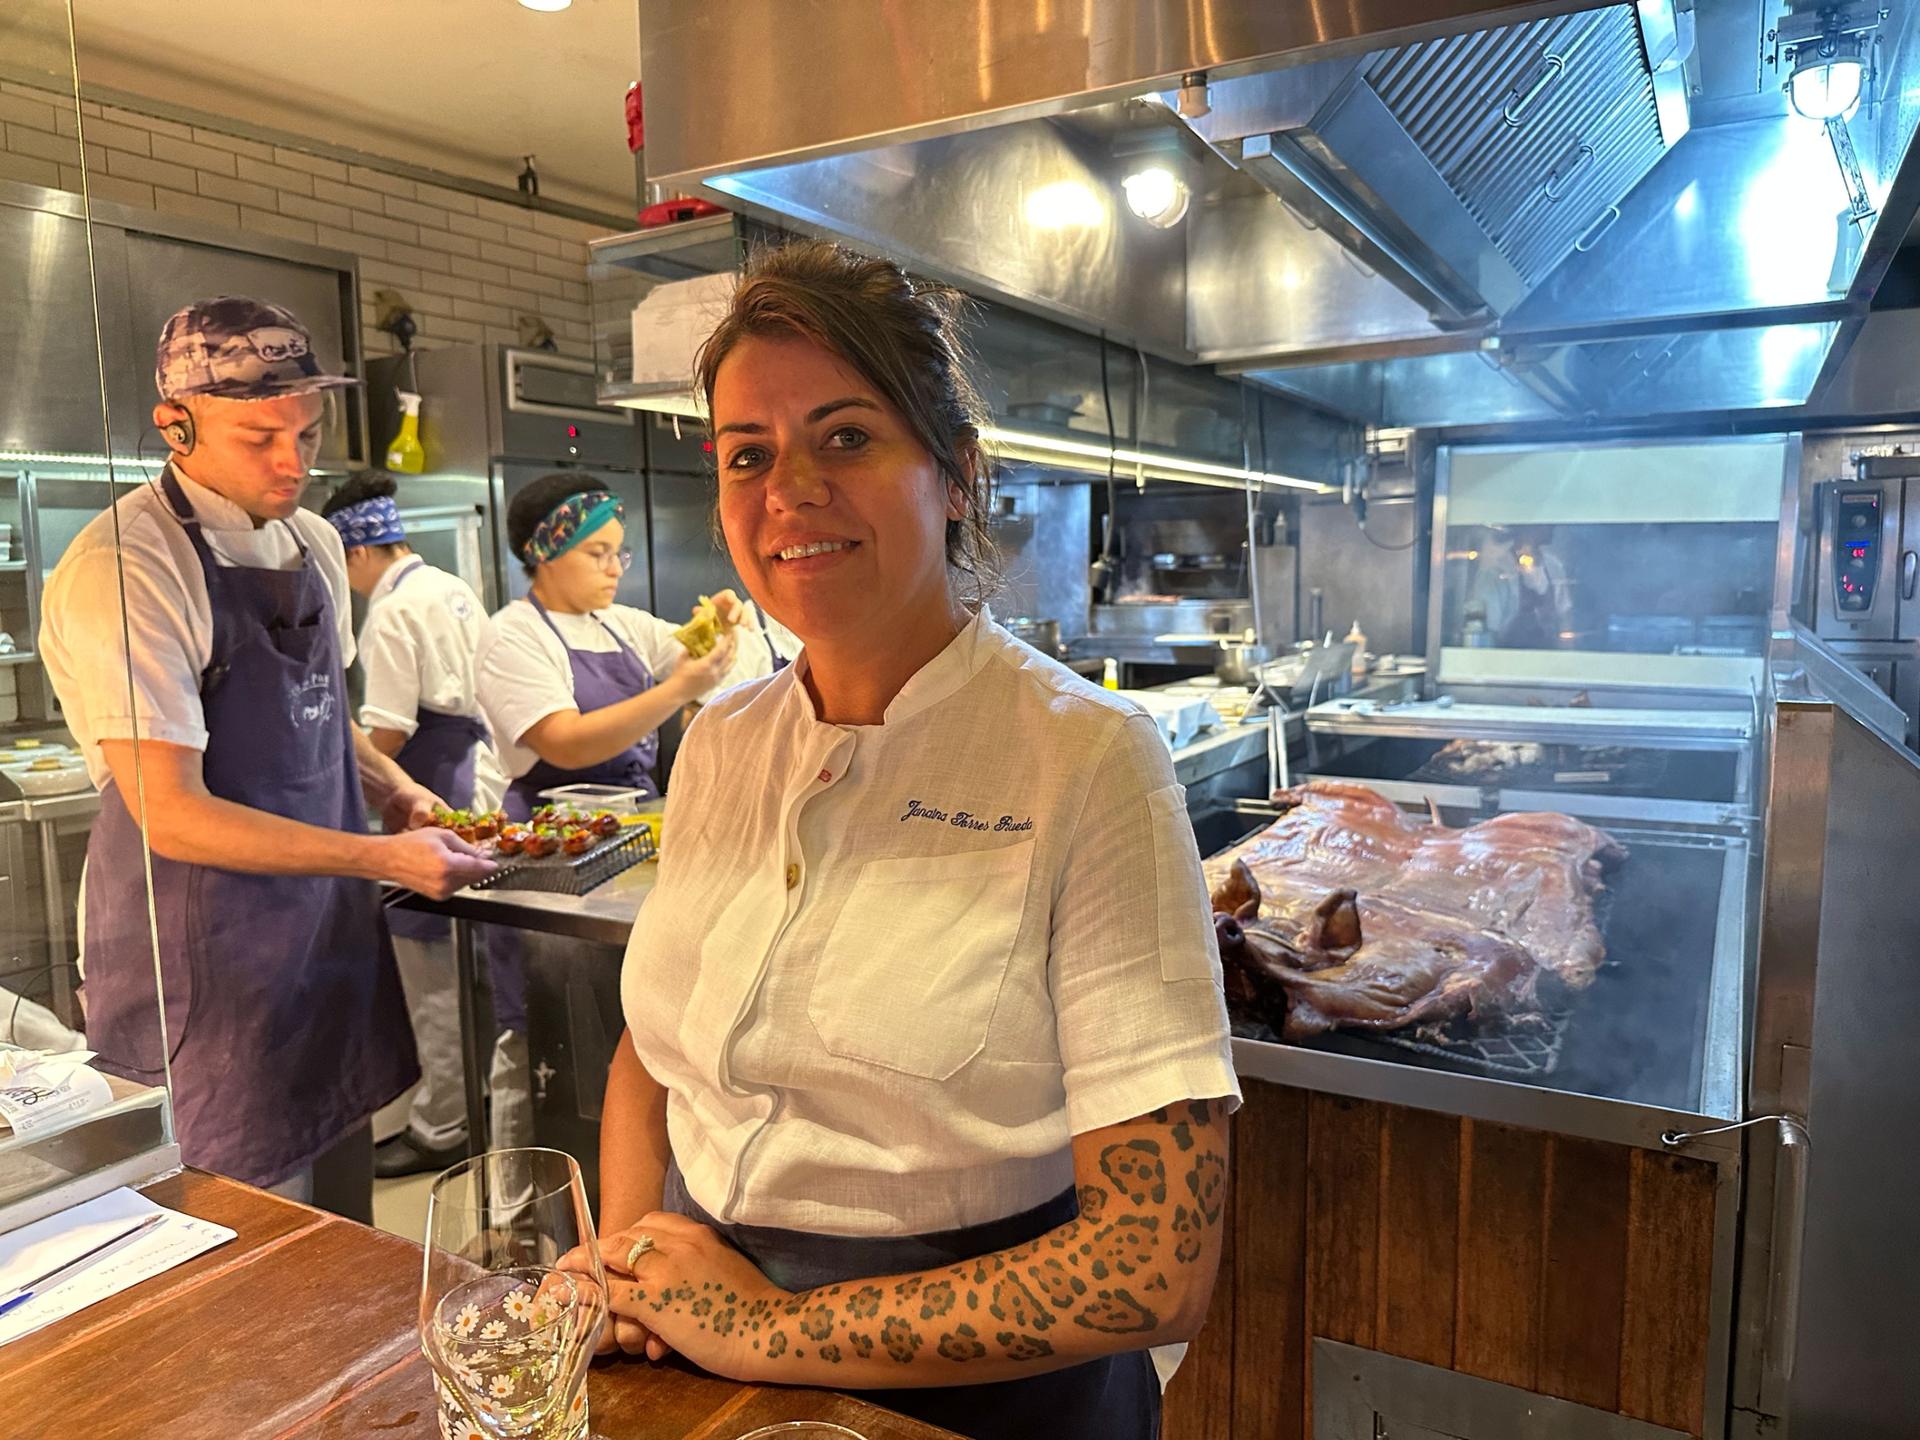 Janaina Rueda, co-chef and co-owner of A Casa do Porco, was born in a slum tenement a few blocks away from the restaurant in downtown São Paulo.